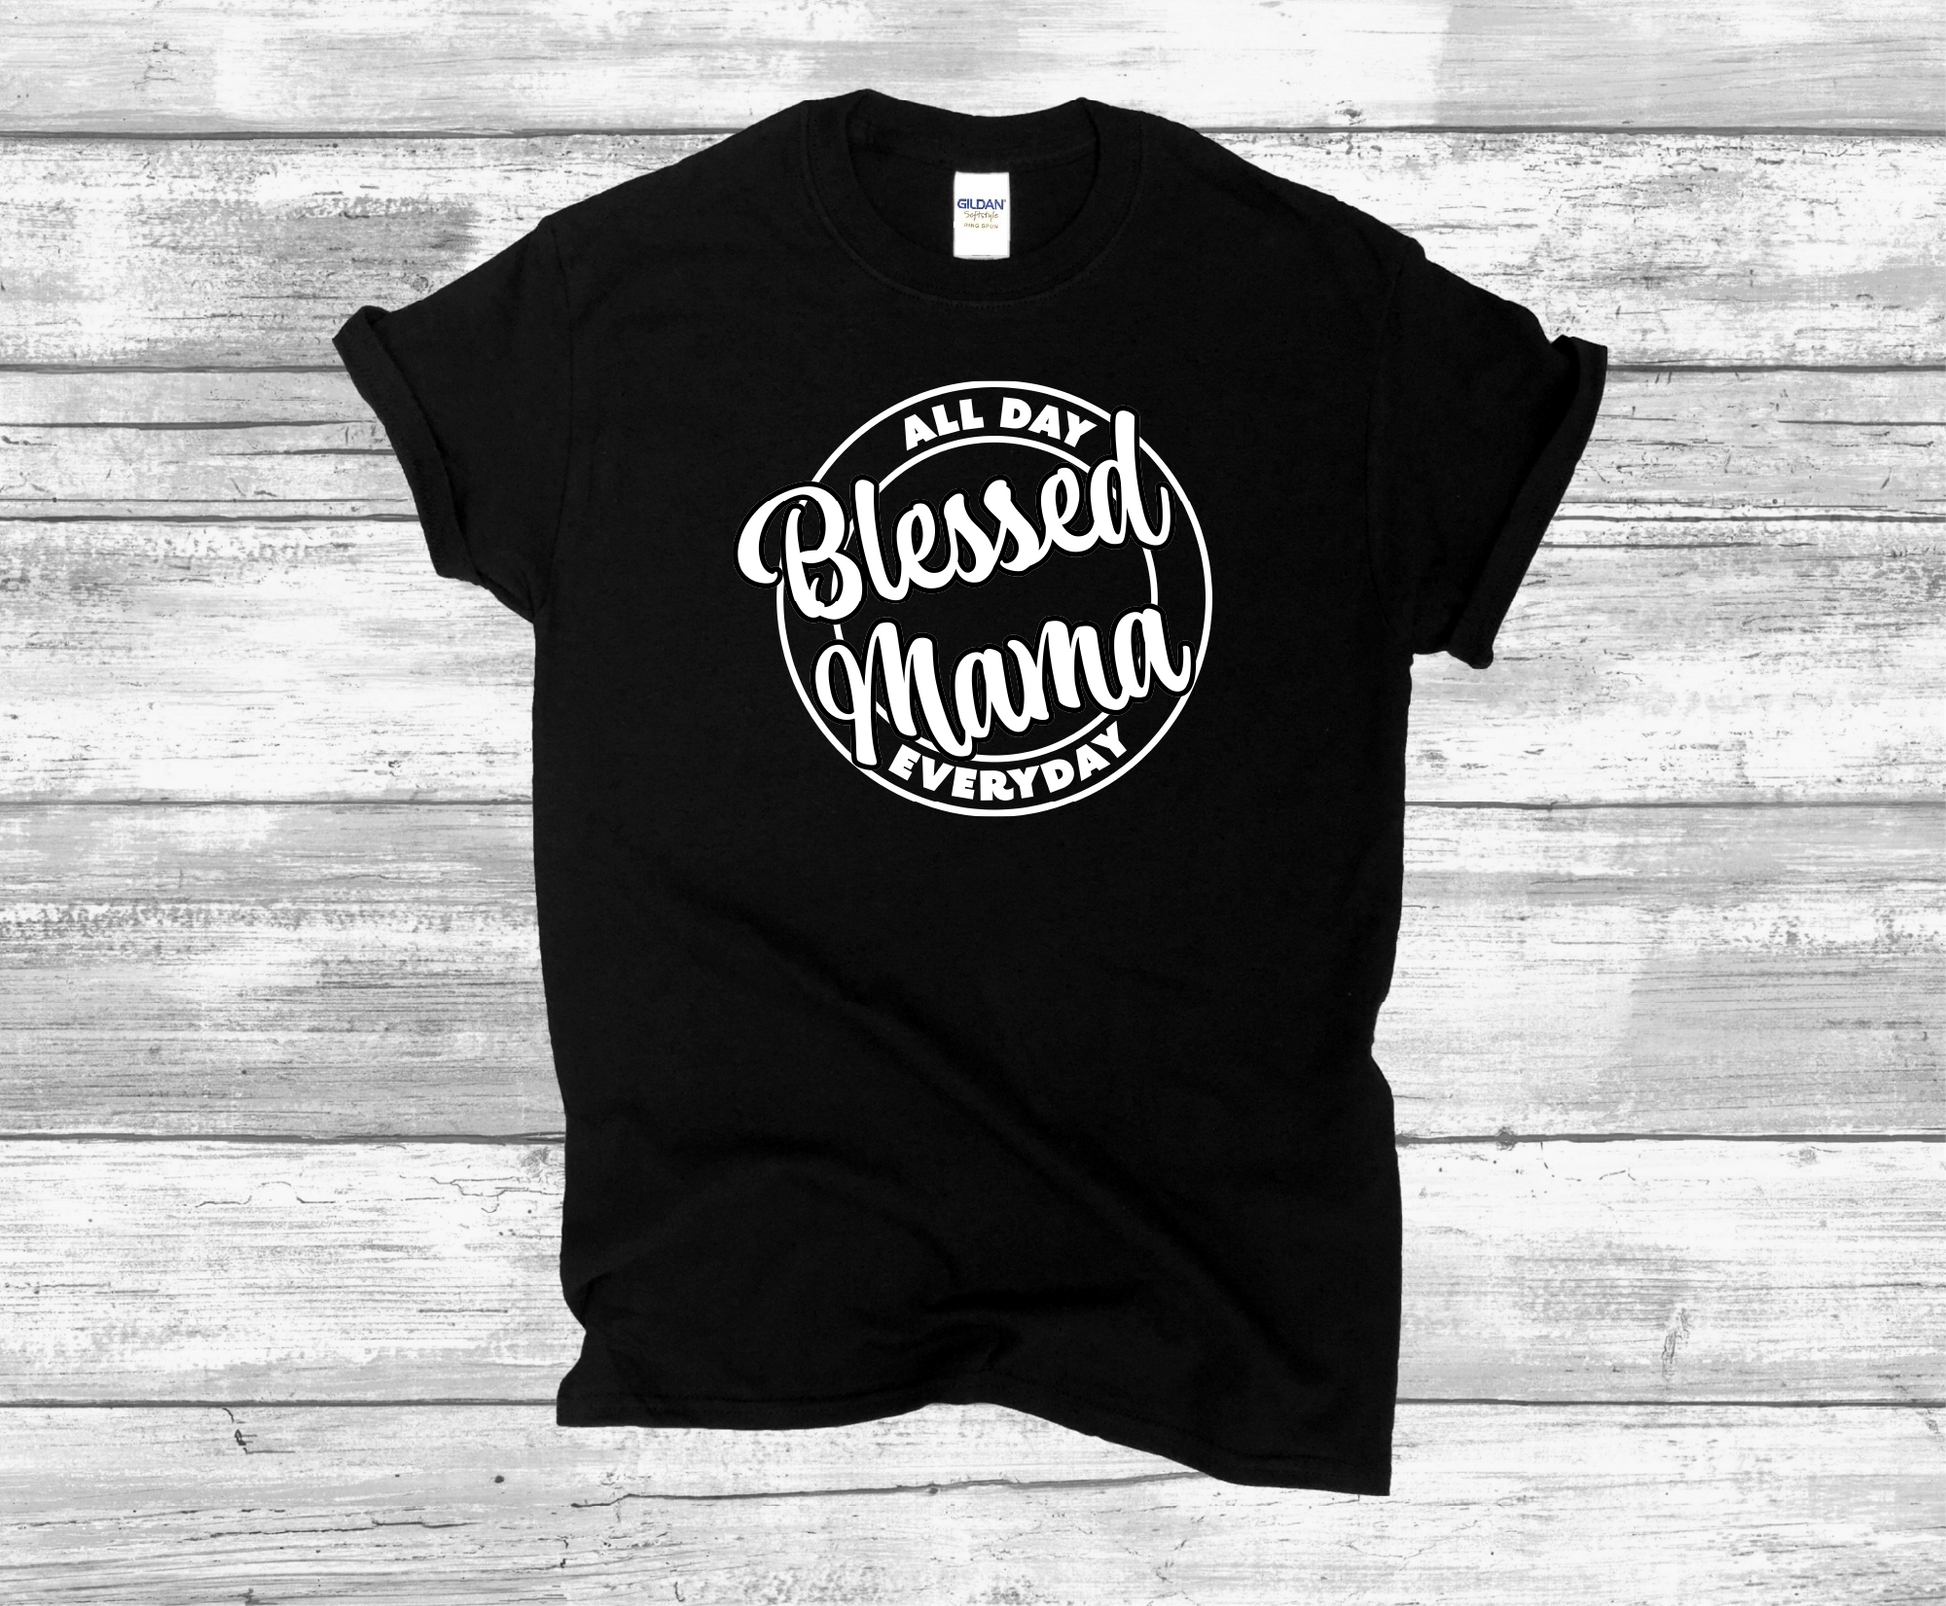 Black t-shirt printed with a design with the words Blessed Mama All Day Everyday in white text.